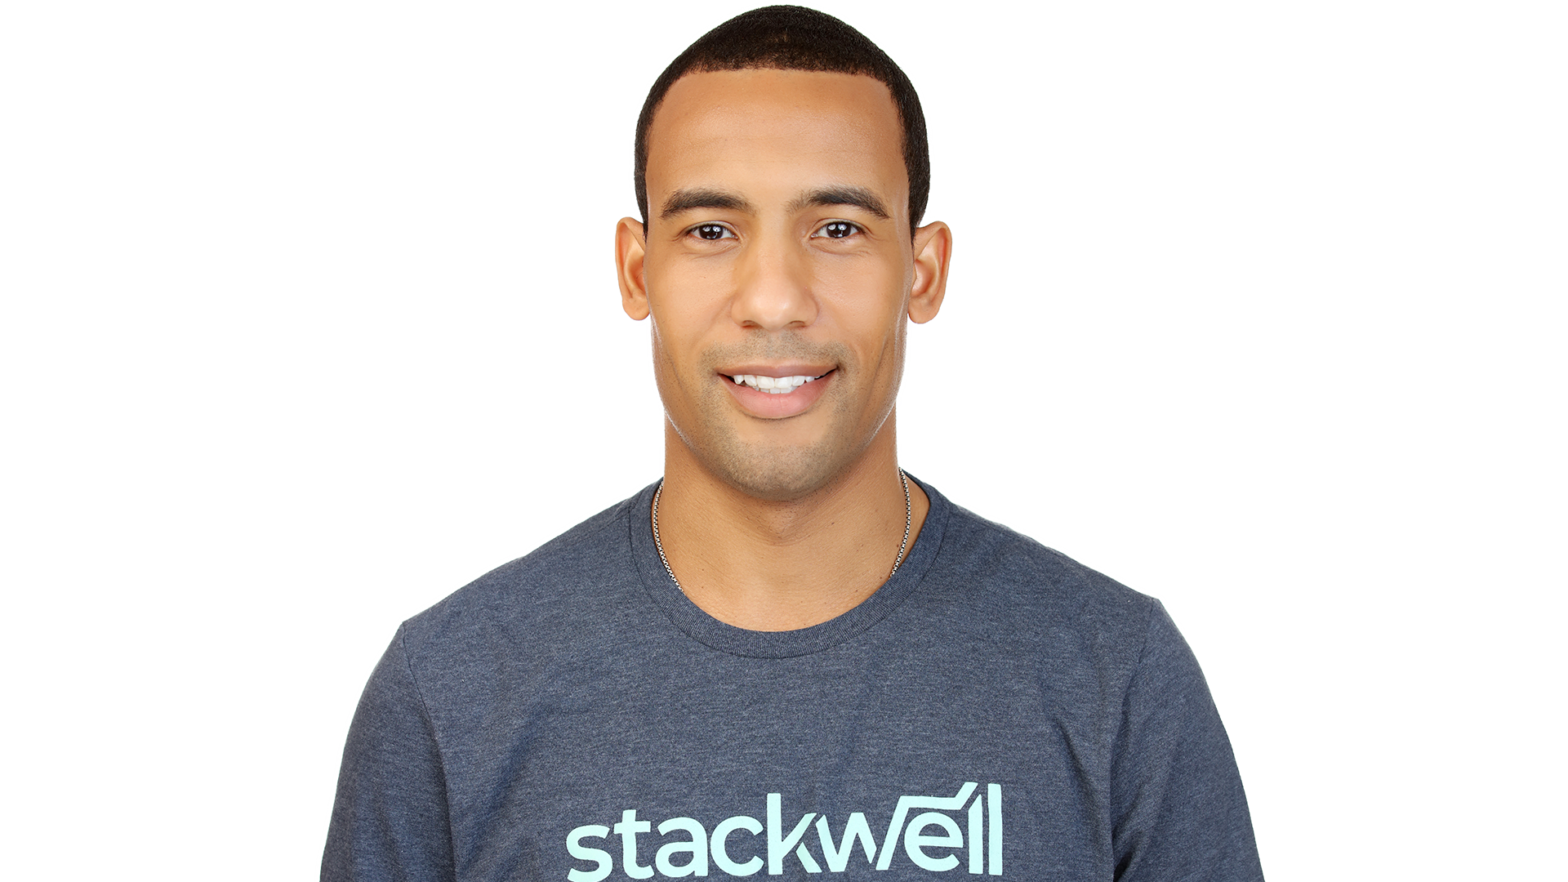 Exclusive: Stackwell Capital Announces Launch Of Robo-Investing App, Plans To Team Up With NBA, WNBA To Accelerate Its Efforts